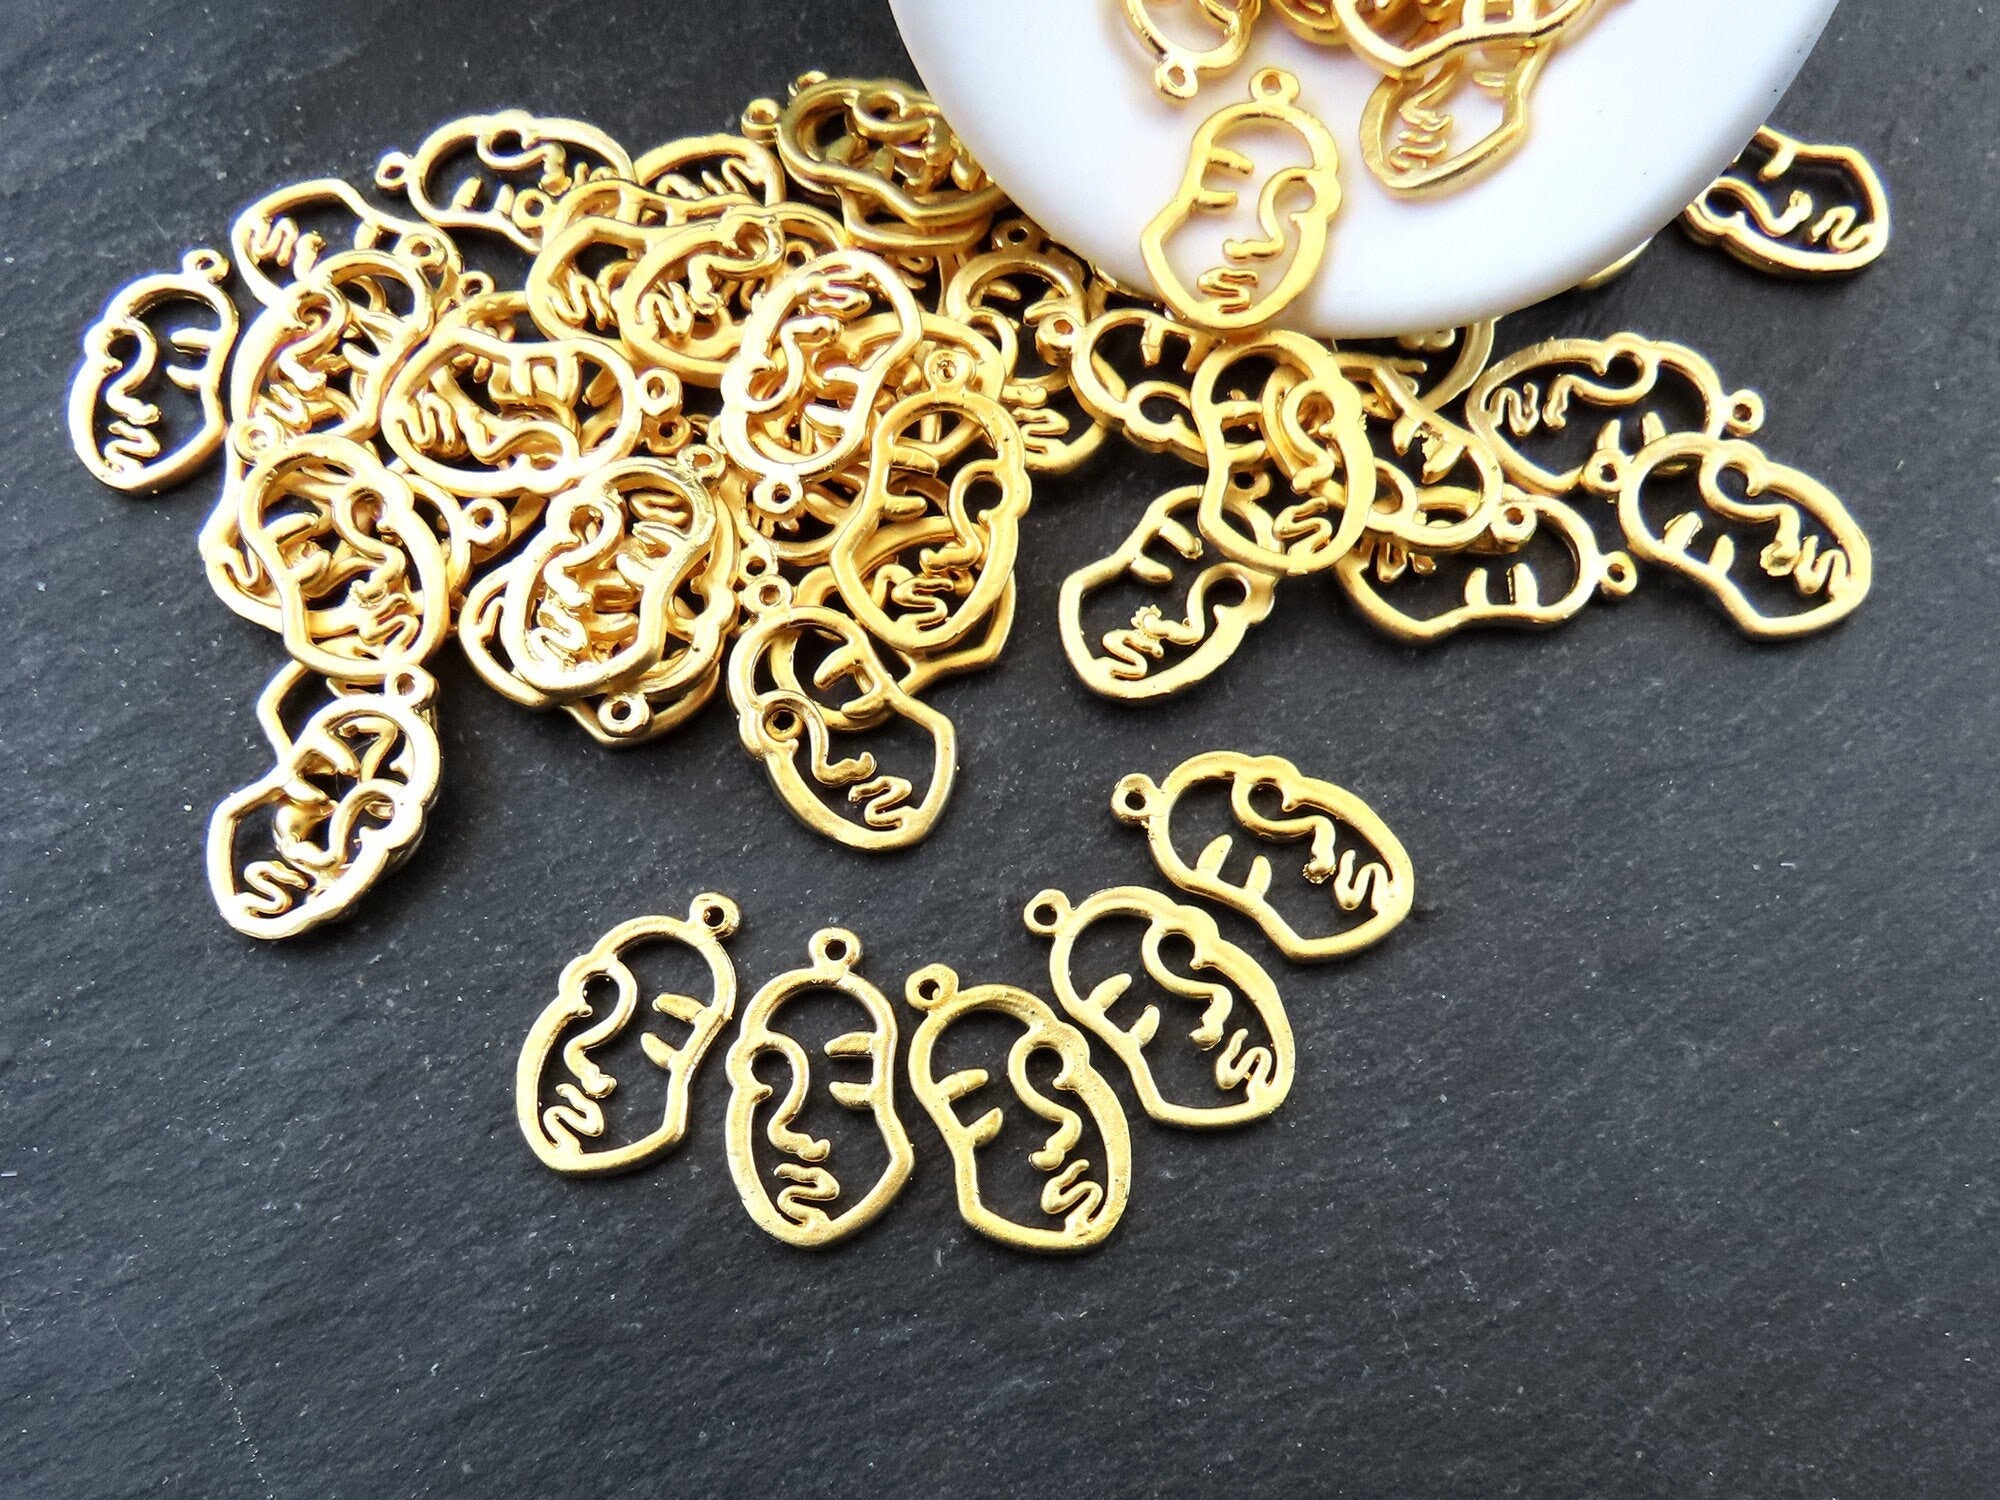 Small Face Pendant Charms, Female Face Outline Silhouette, Abstract Face, Rustic Artisan Jewelry Charms, 22k Matte Gold Plated Brass, 8pcs